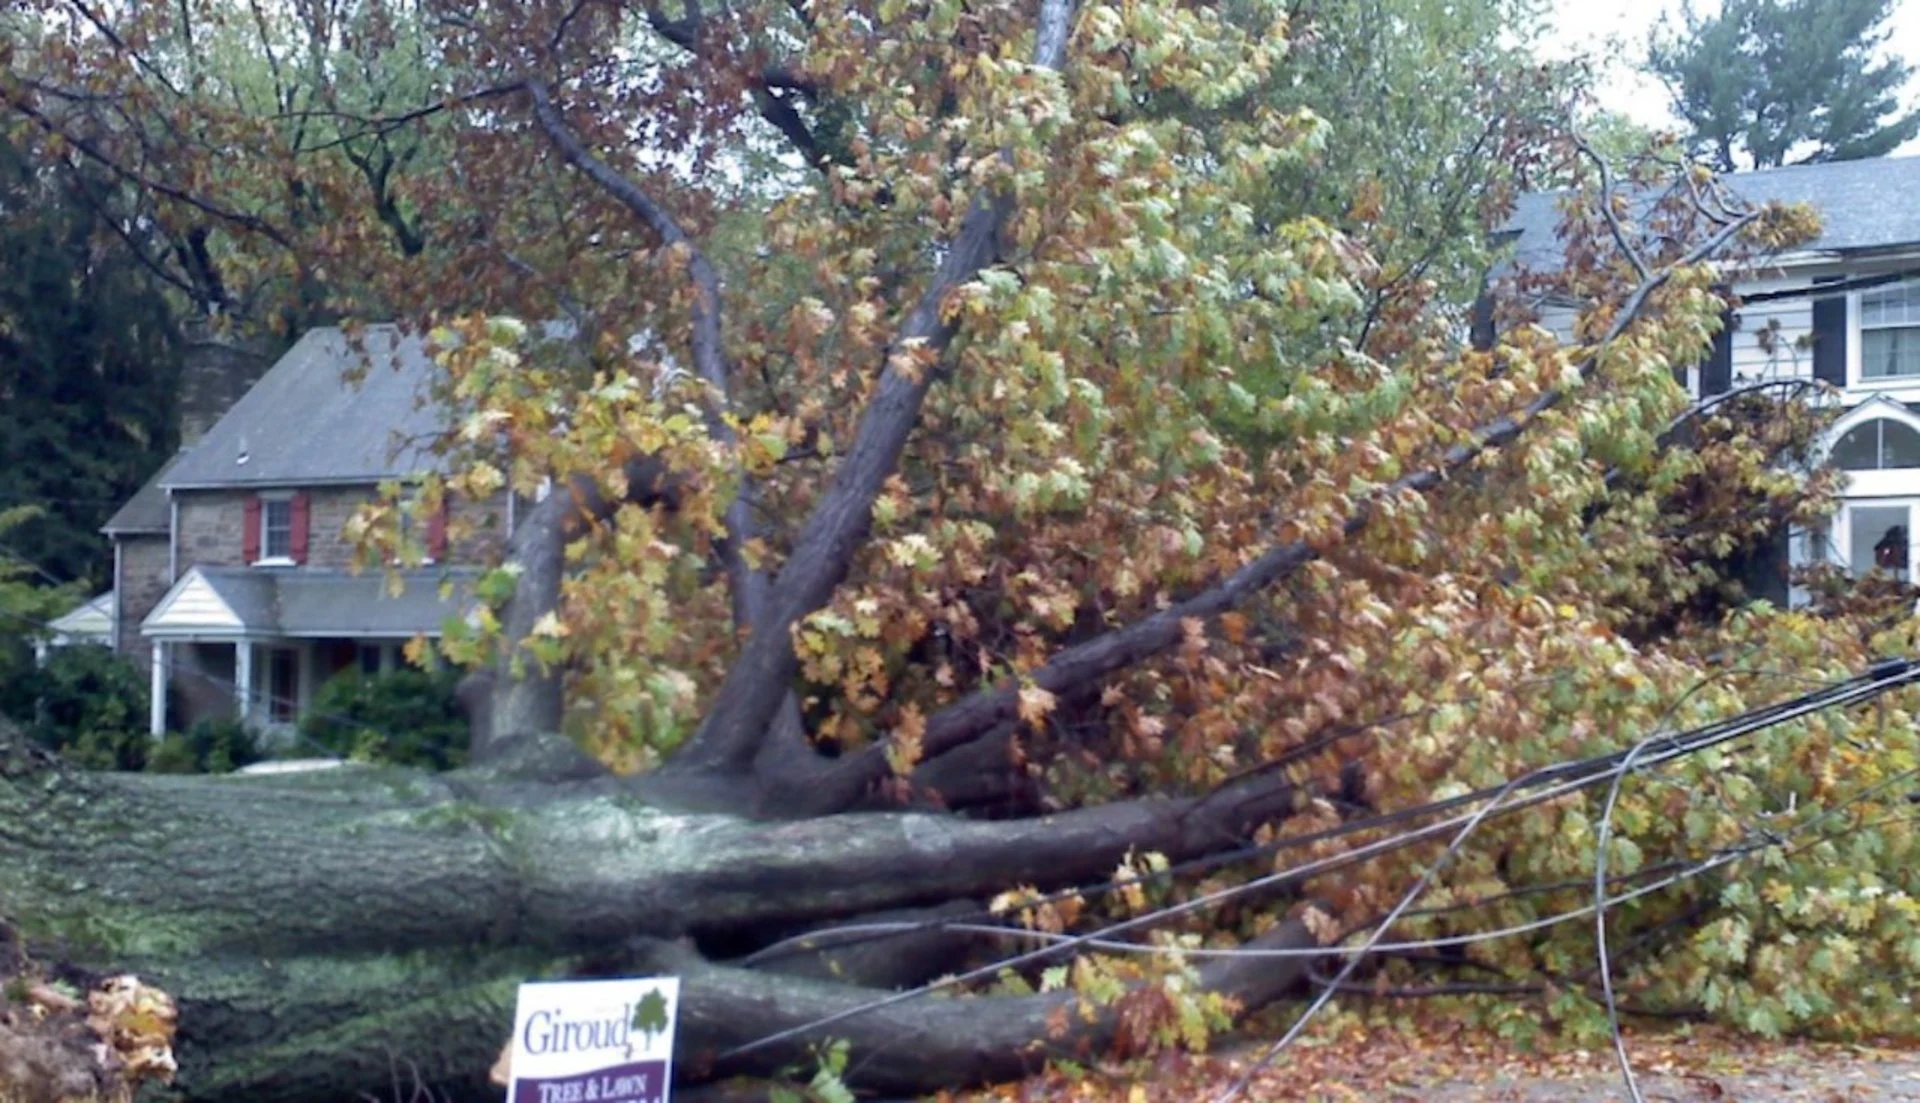 October 25, 2012 - Hurricane Sandy at its strongest